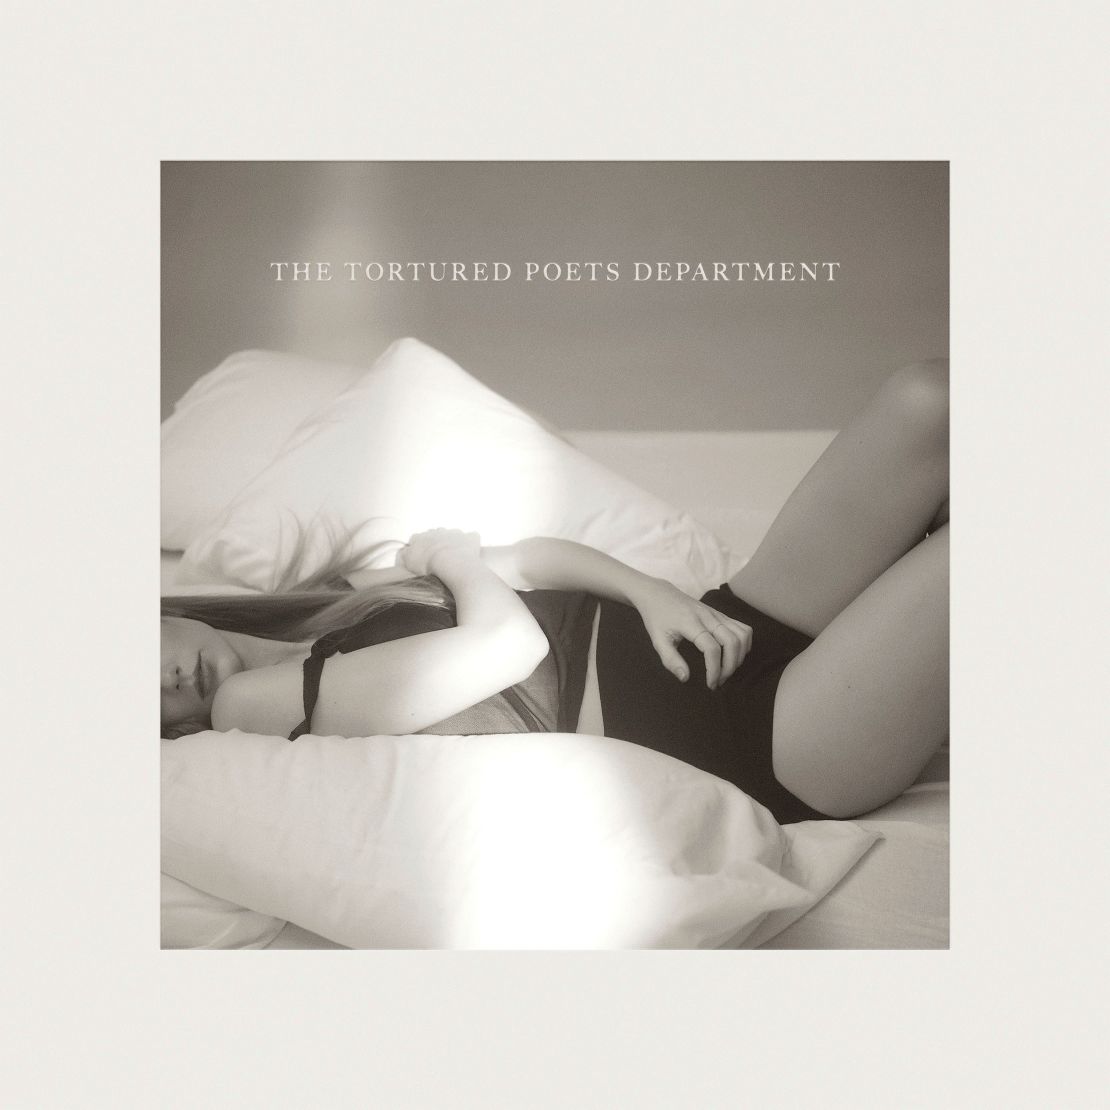 The cover of Taylor Swift's 'The Tortured Poets Department' double album released Friday.